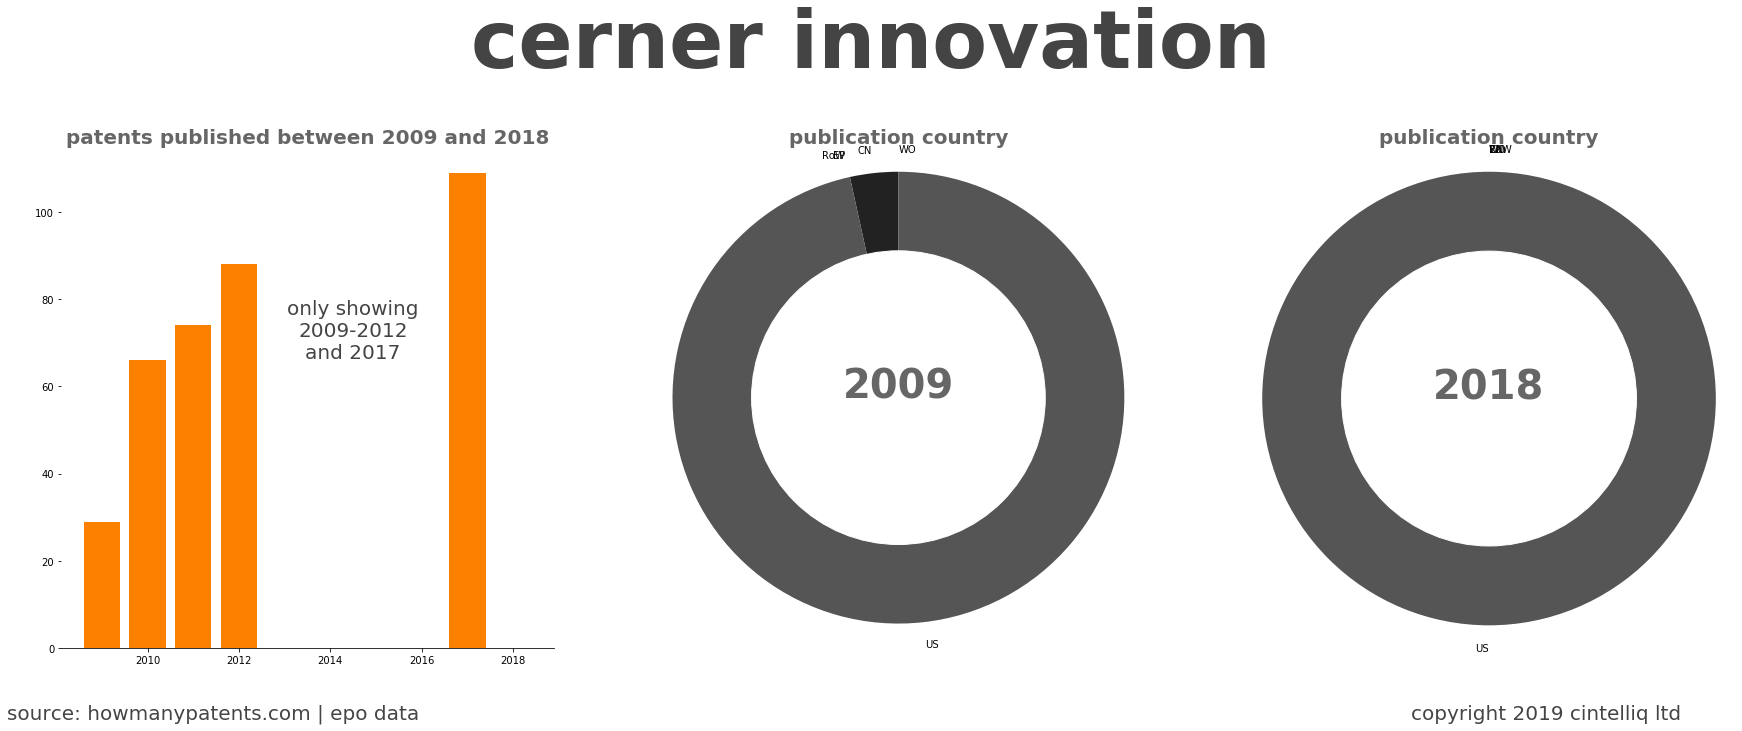 summary of patents for Cerner Innovation